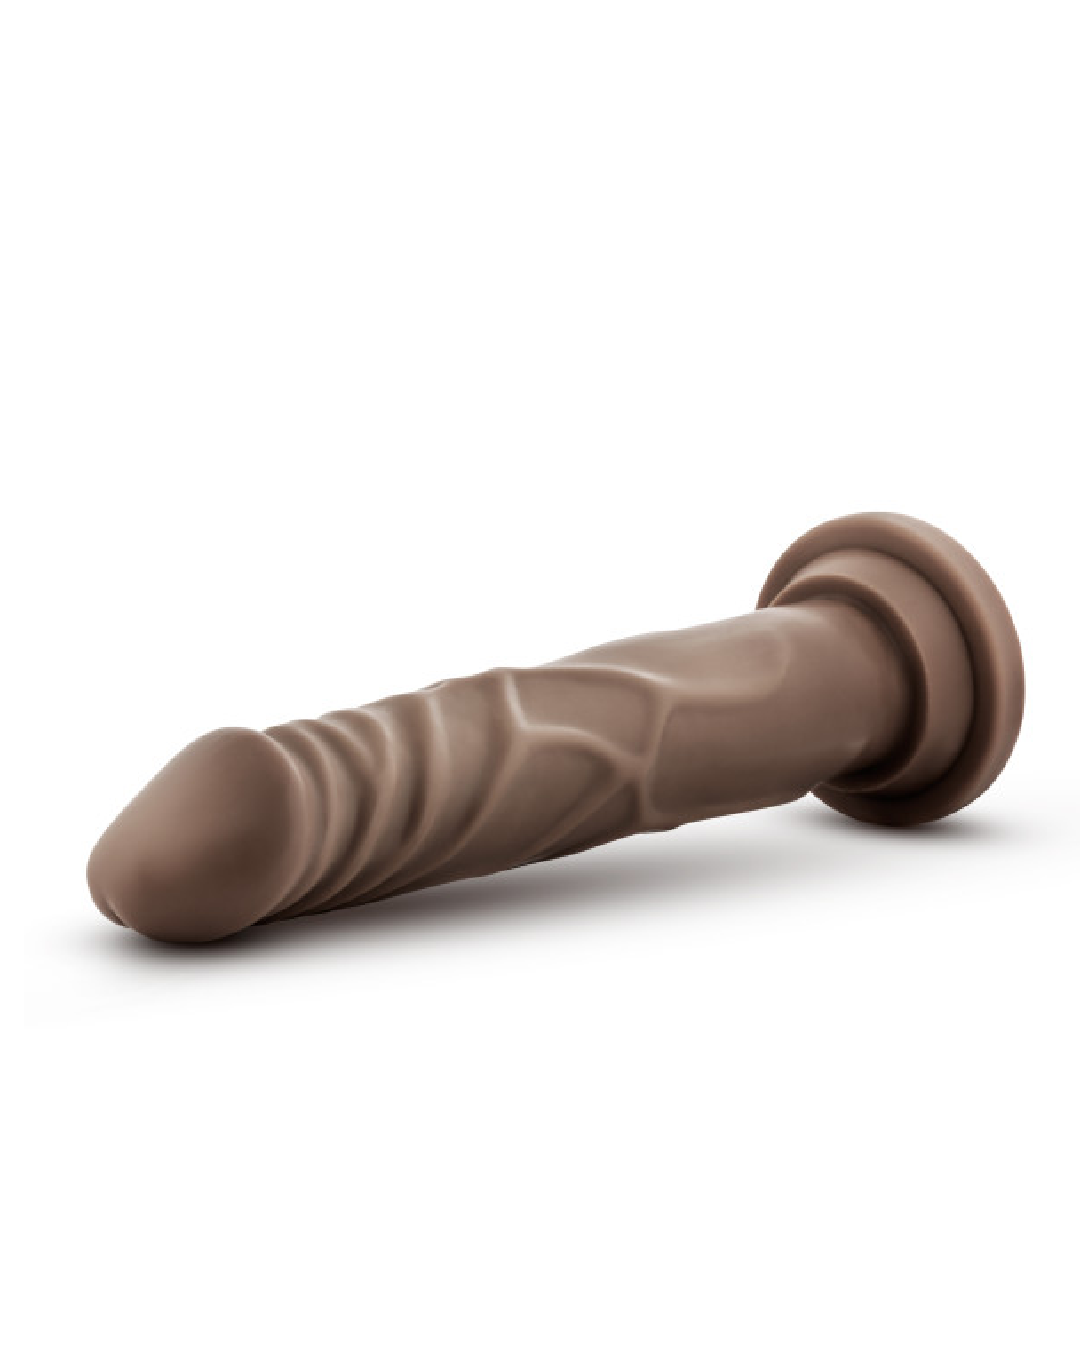 Dr Carter 7 Inch Silicone Dildo - Chocolate laying down 